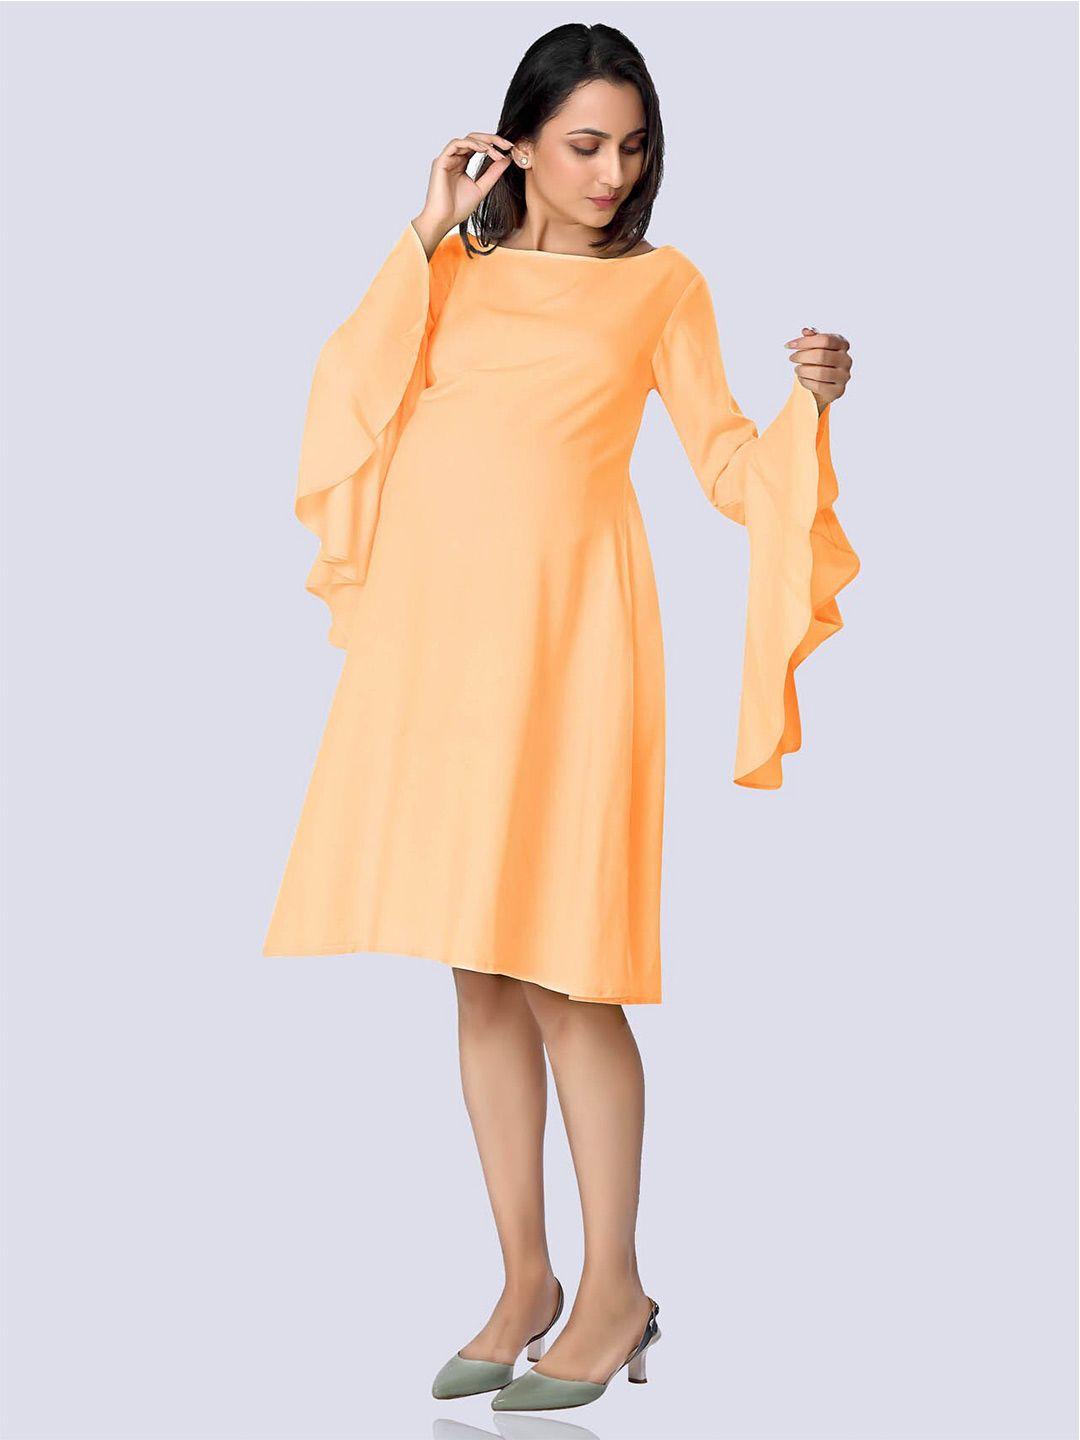 mom for sure by ketki dalal peach-coloured maternity dress